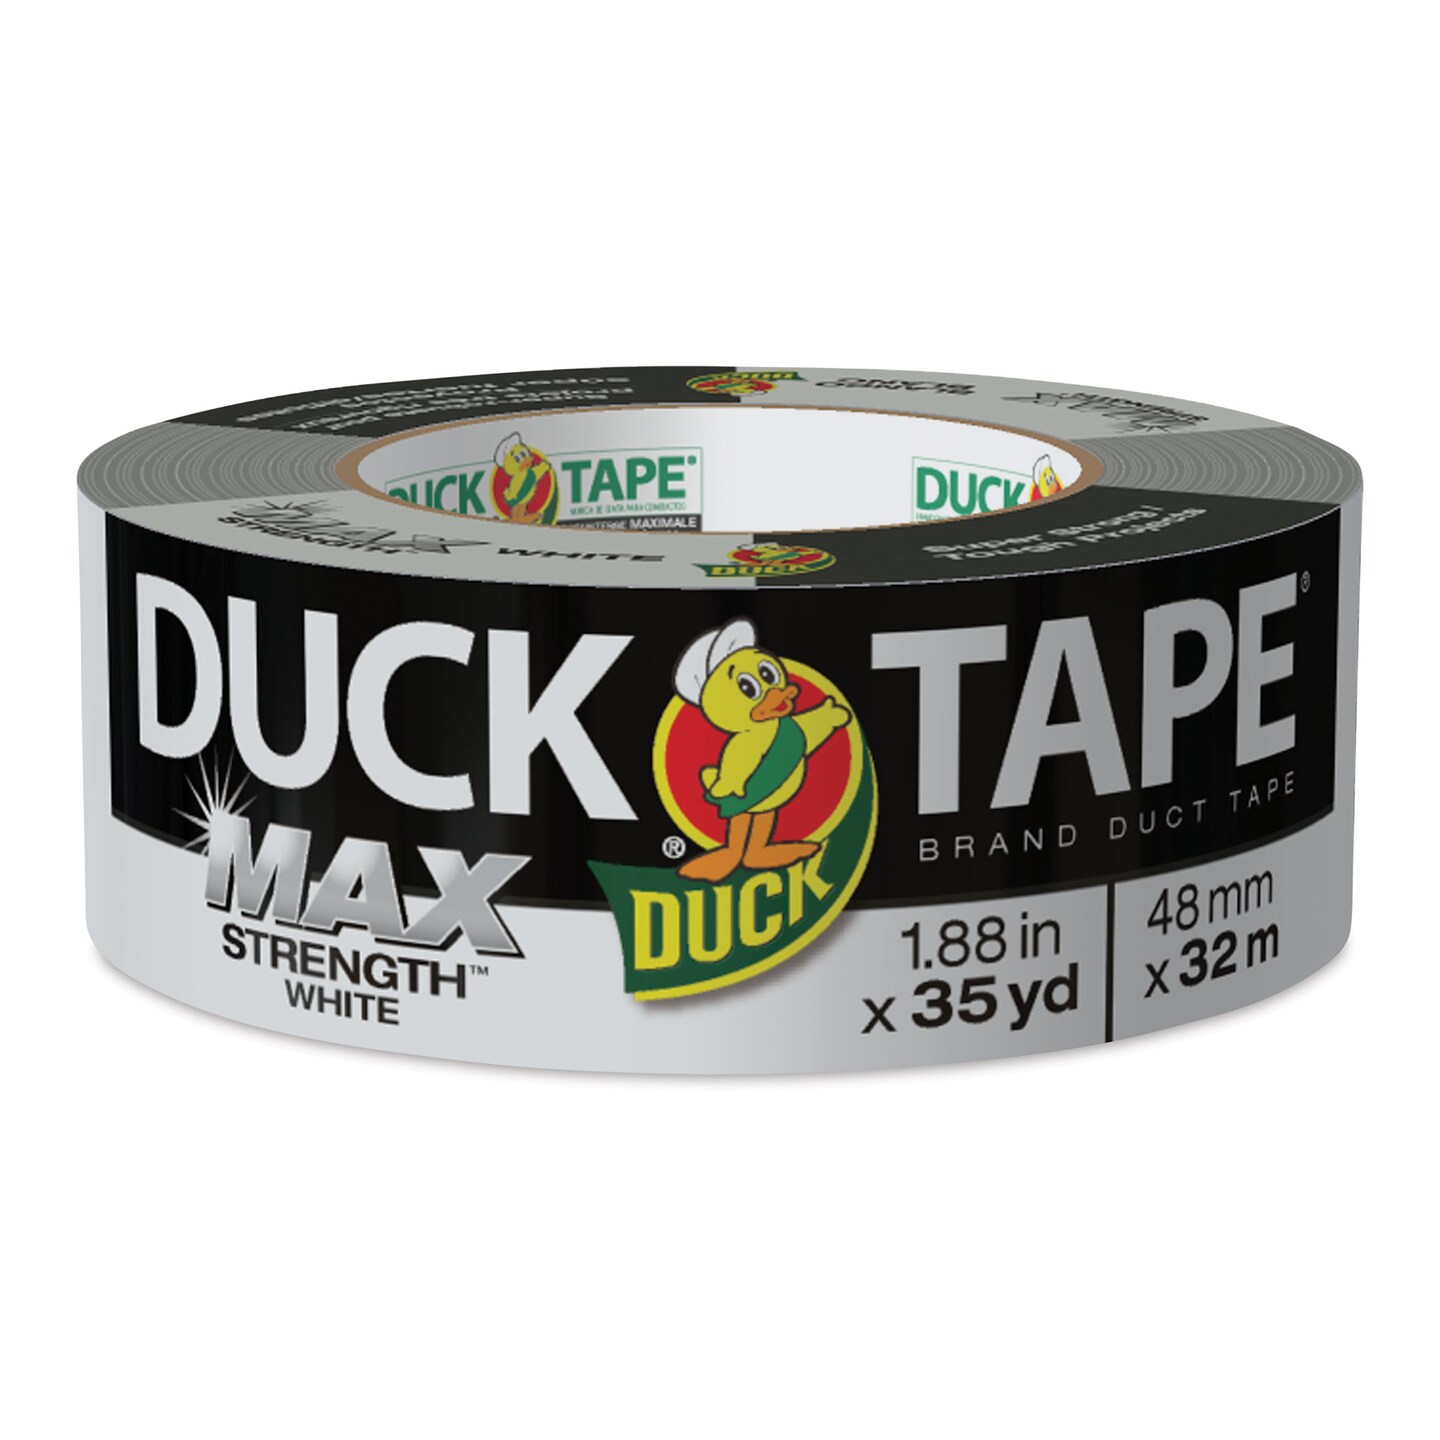 Michaels Sell Duct Tape, Mankind Duct Tape